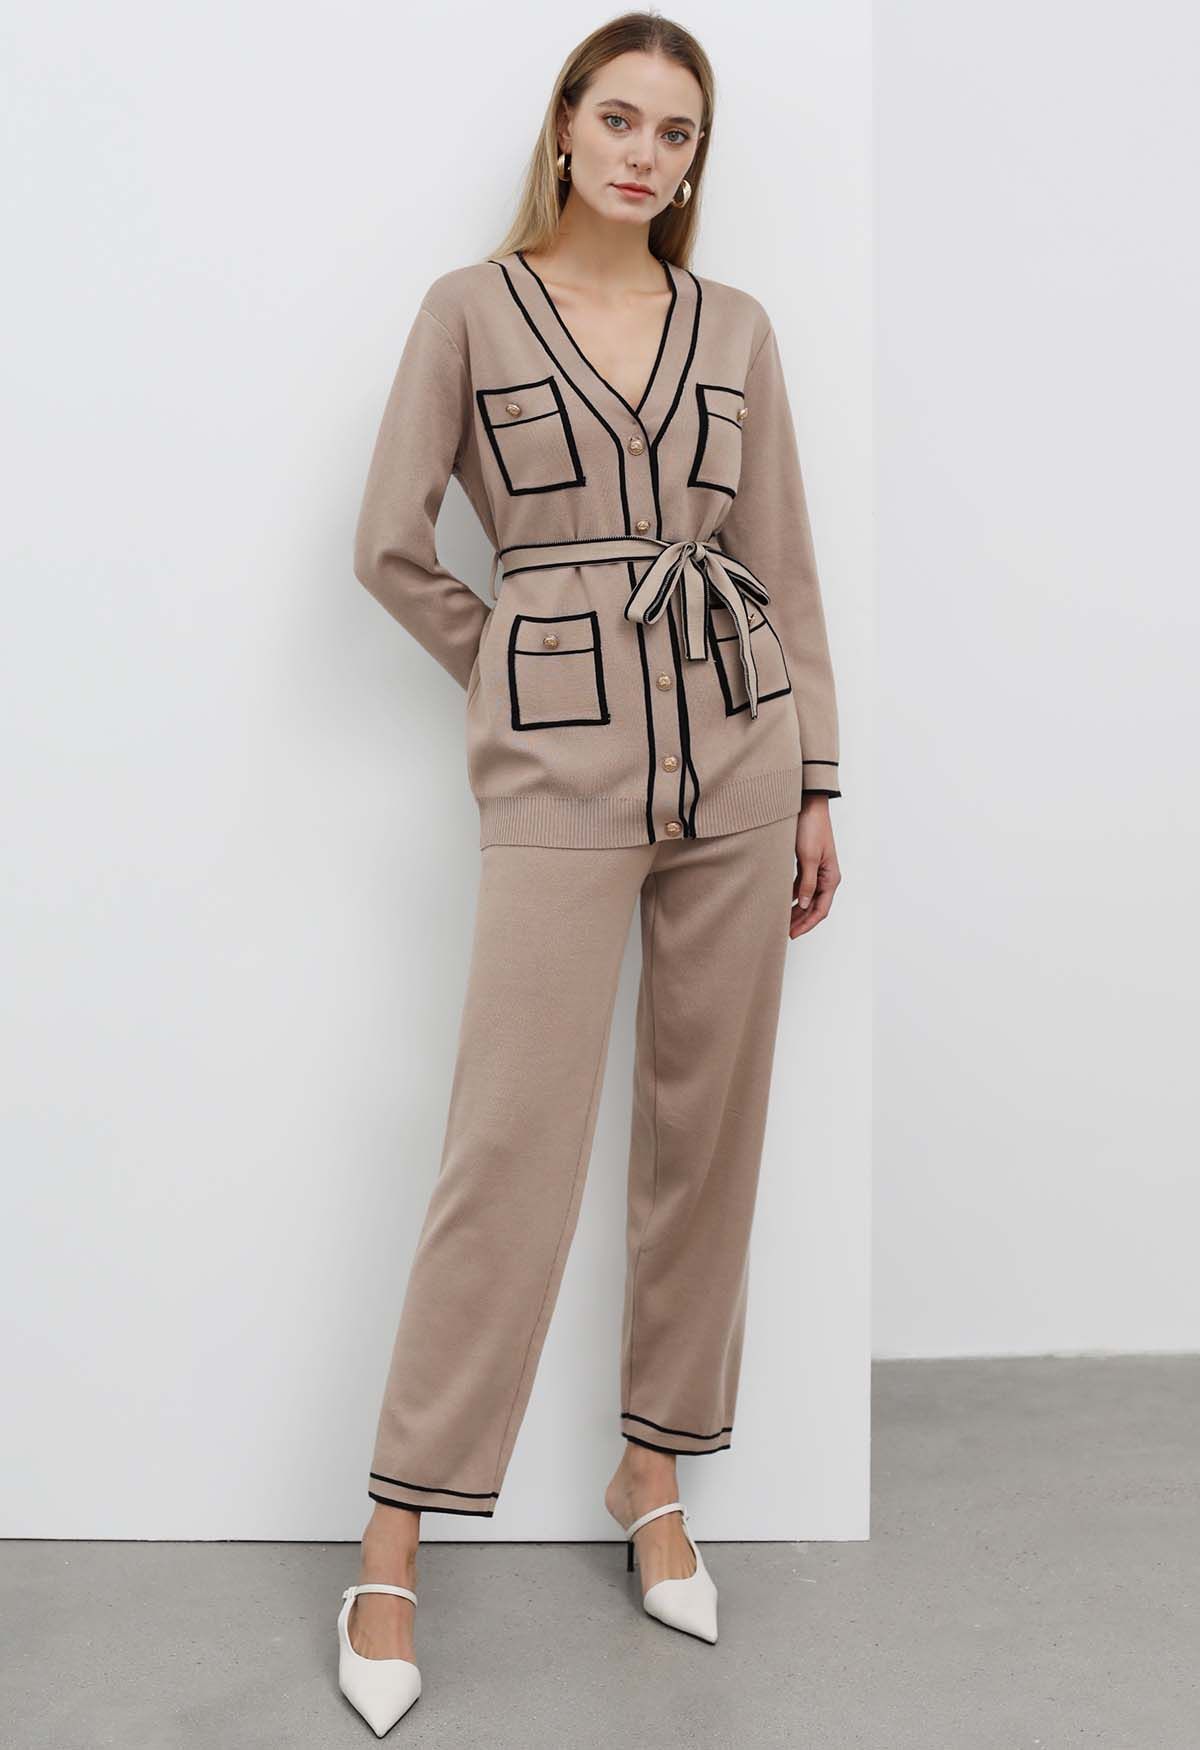 Contrast Edge Buttons Knit Cardigan and Pants Set in Camel